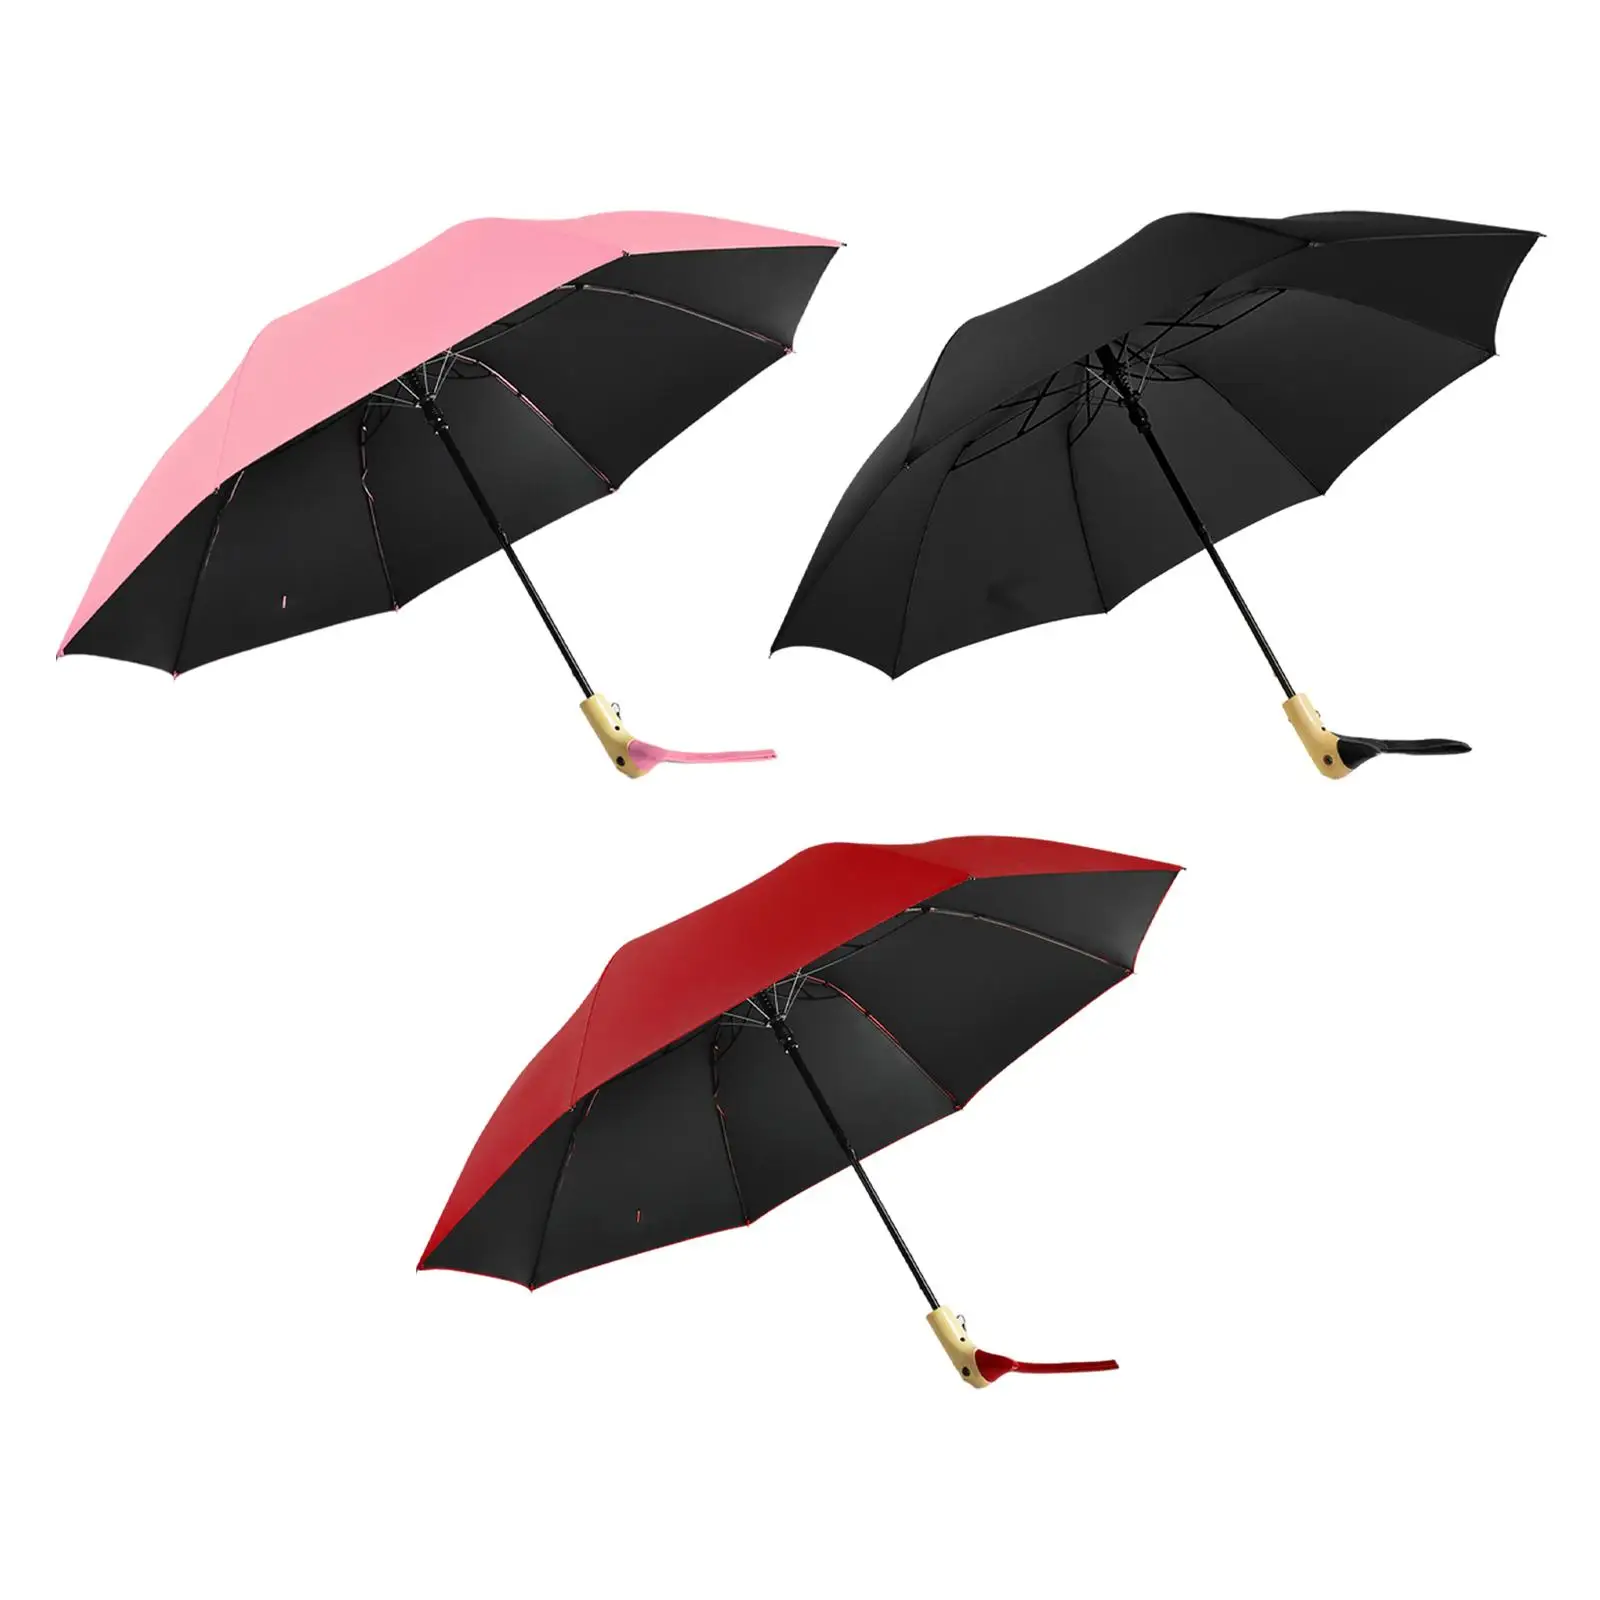 Two Fold Automatic Duck Umbrella Multifunction Durable Wooden Handle Umbrella for Climbing Travel Backpacking Walking Outdoor